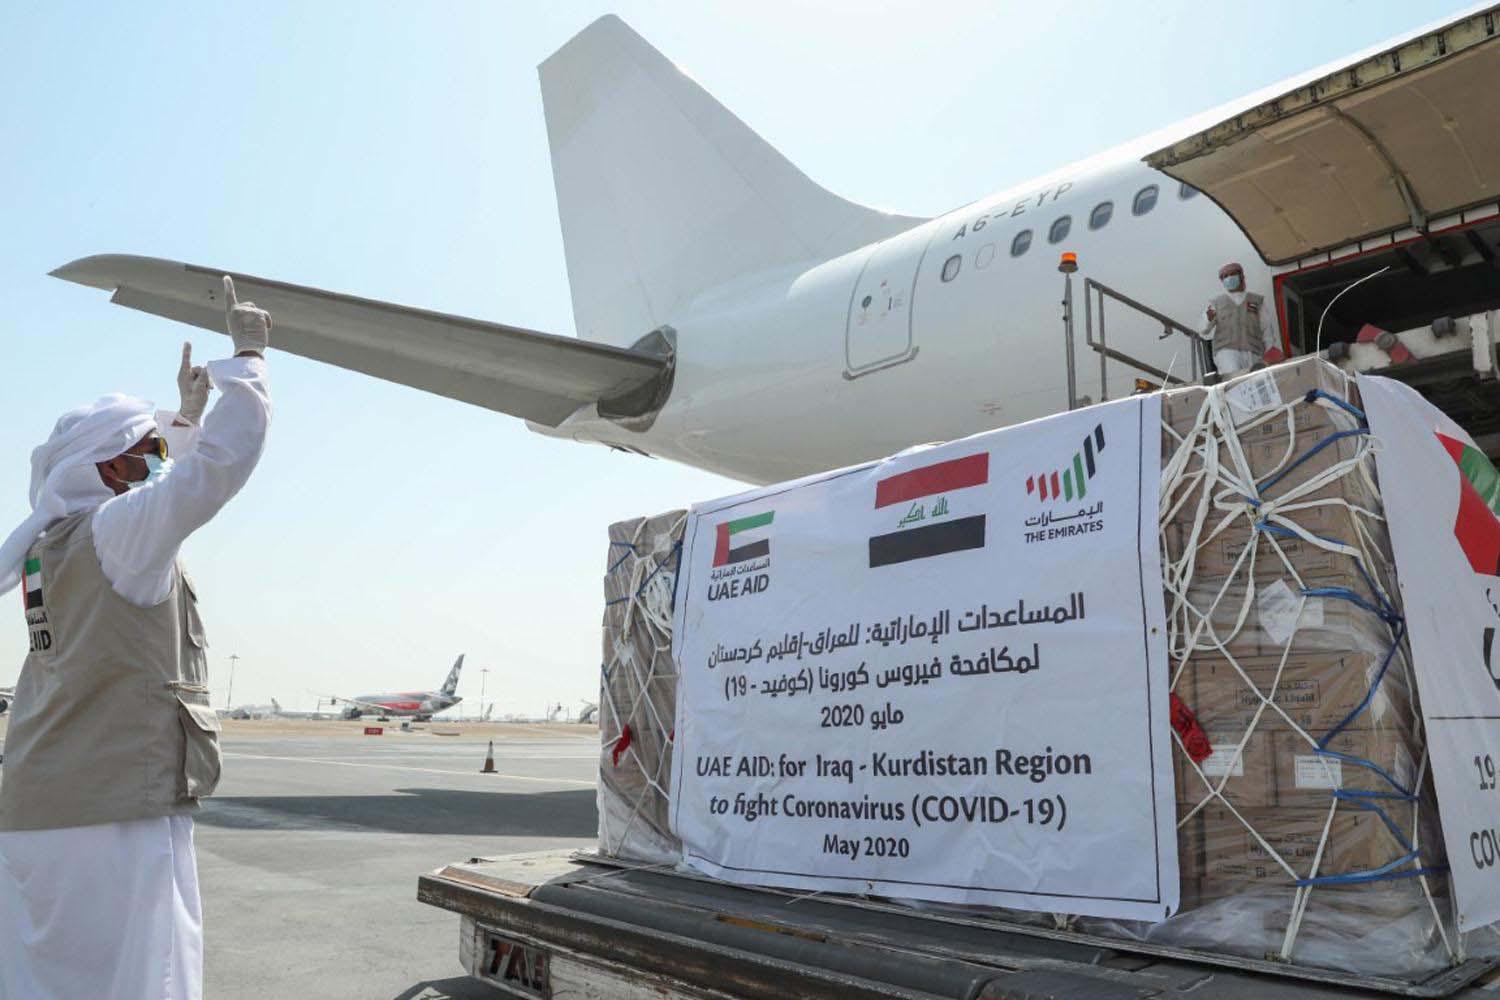 The UAE's global response to COVID-19 has reached several countries across the world